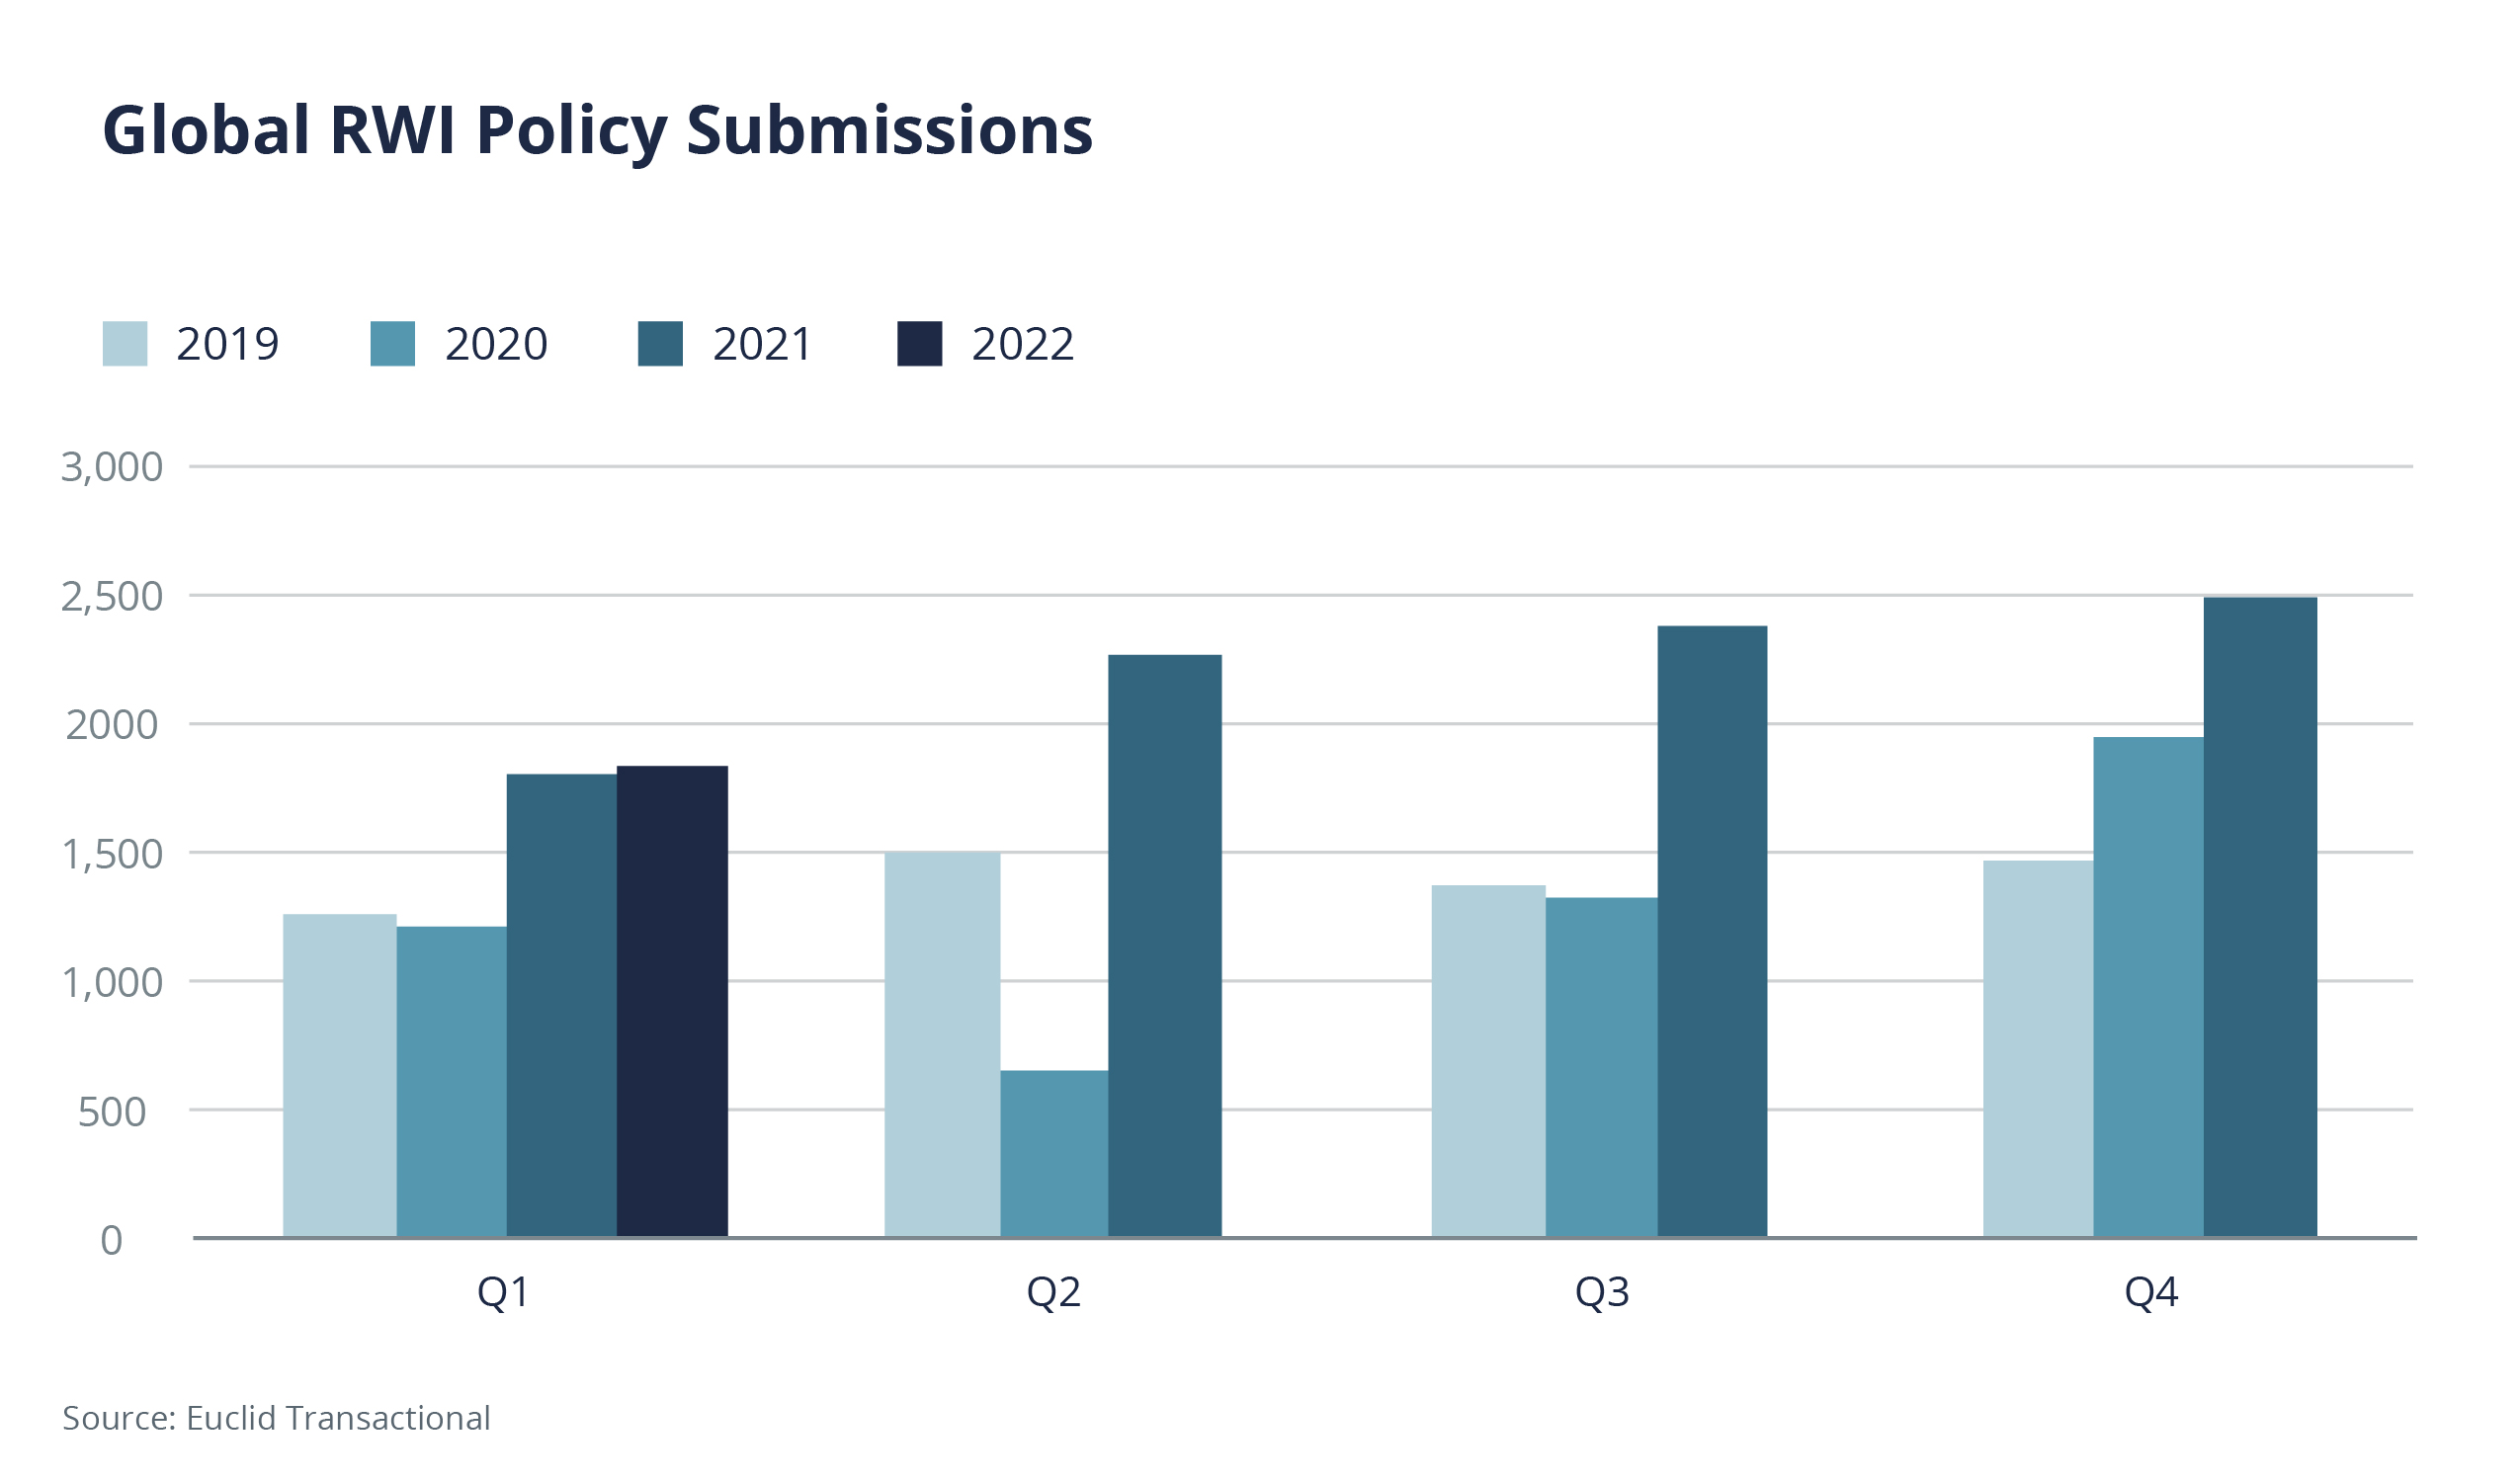 A bar graph of global RWI policy submissions with data from Euclid Transactional shows 2022 Q1 submissions were in the range of 1750, similarly to 2021 Q1, but much less than the around 2500 in 2021 Q4. 2021 submissions were notable above 2019 and 2020 for all quarters.